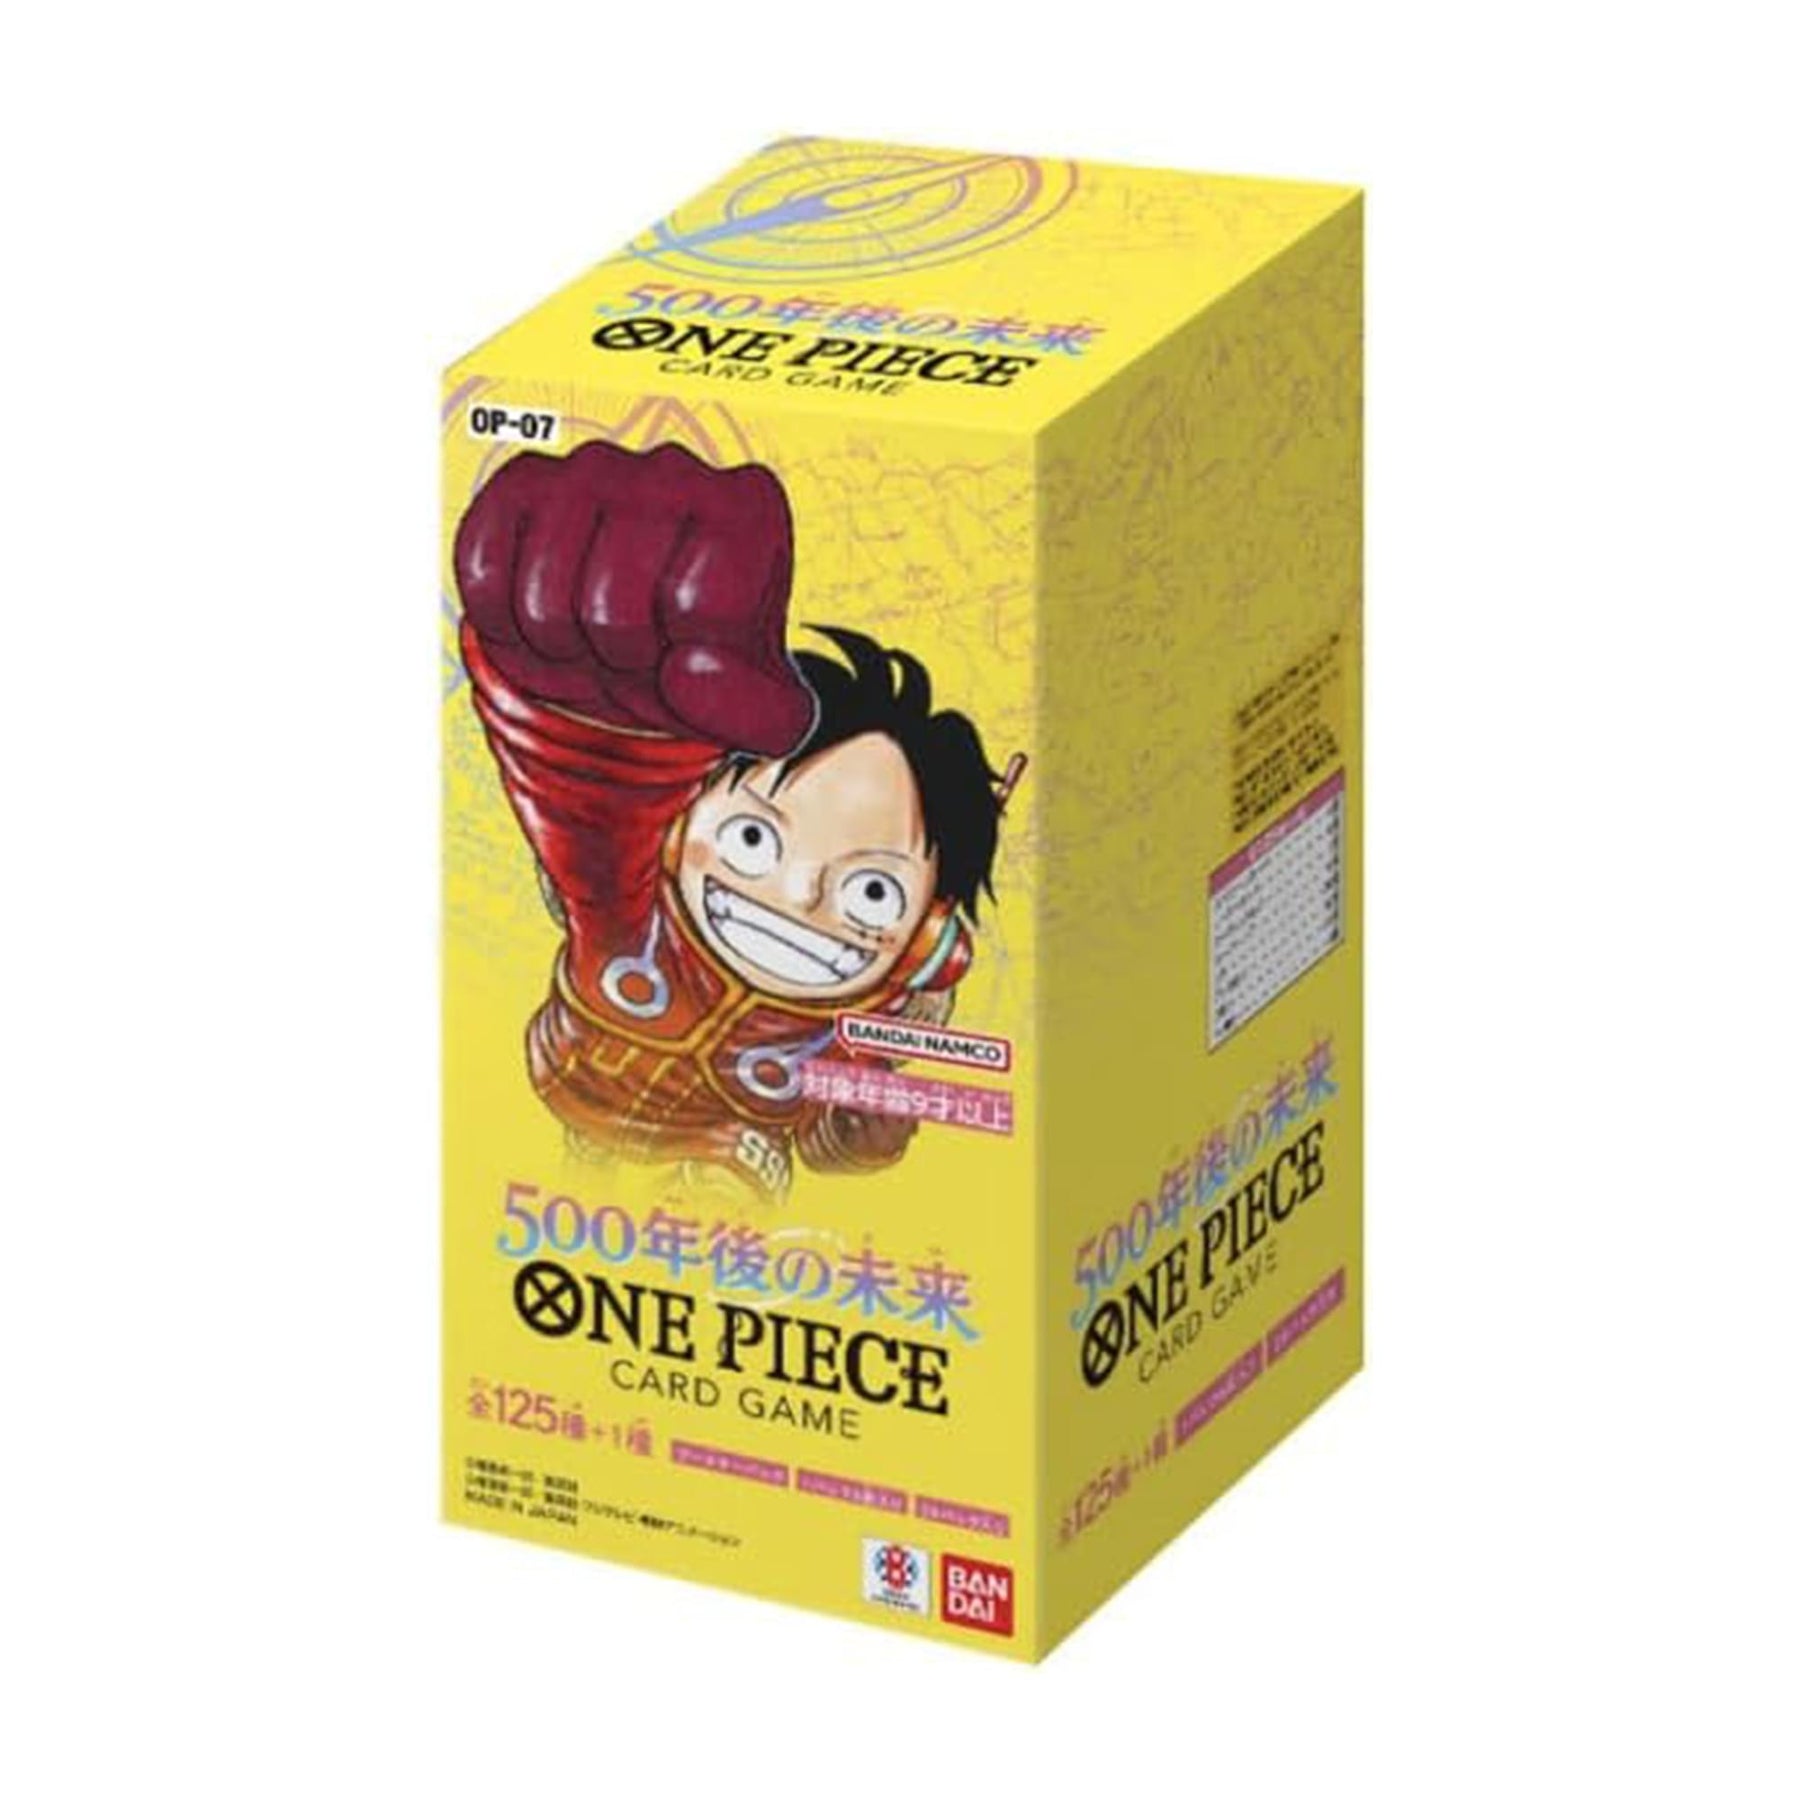 One Piece TCG OP-07 Future 500 Years Later Booster Box Japanese Version |  24 Packs